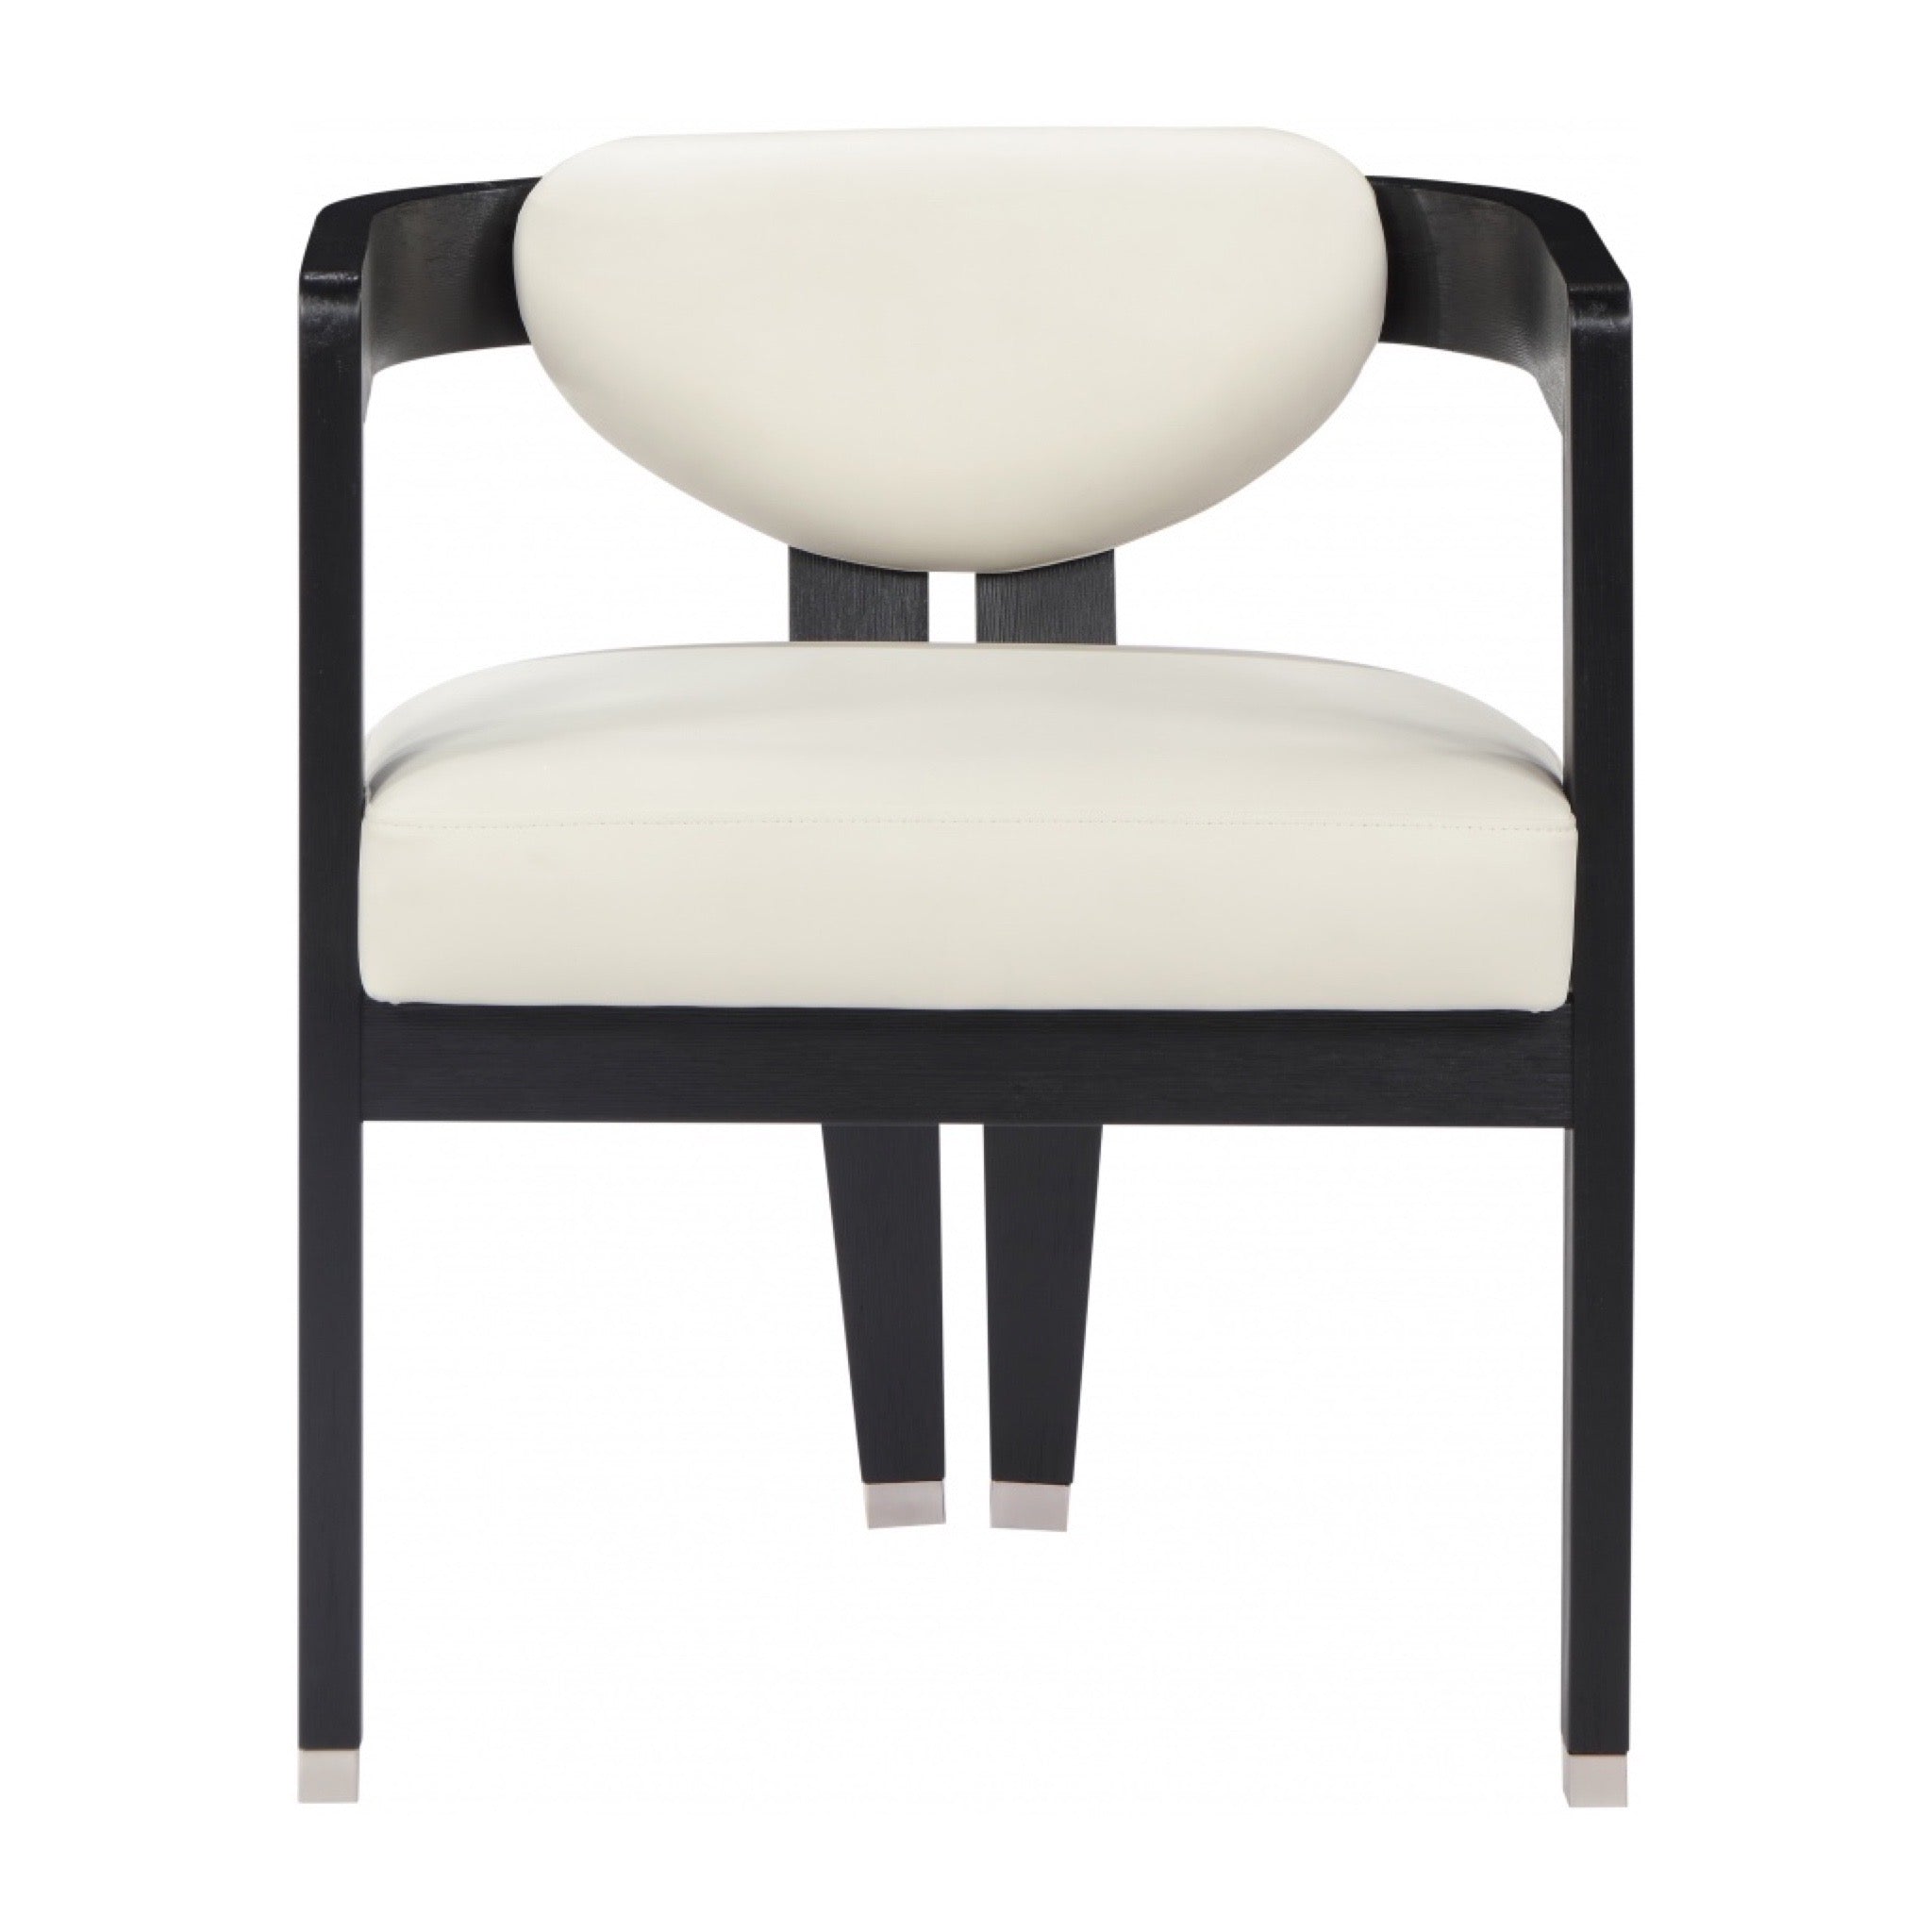 CARLYLE FAUX LEATHER DINING CHAIR - BLACK